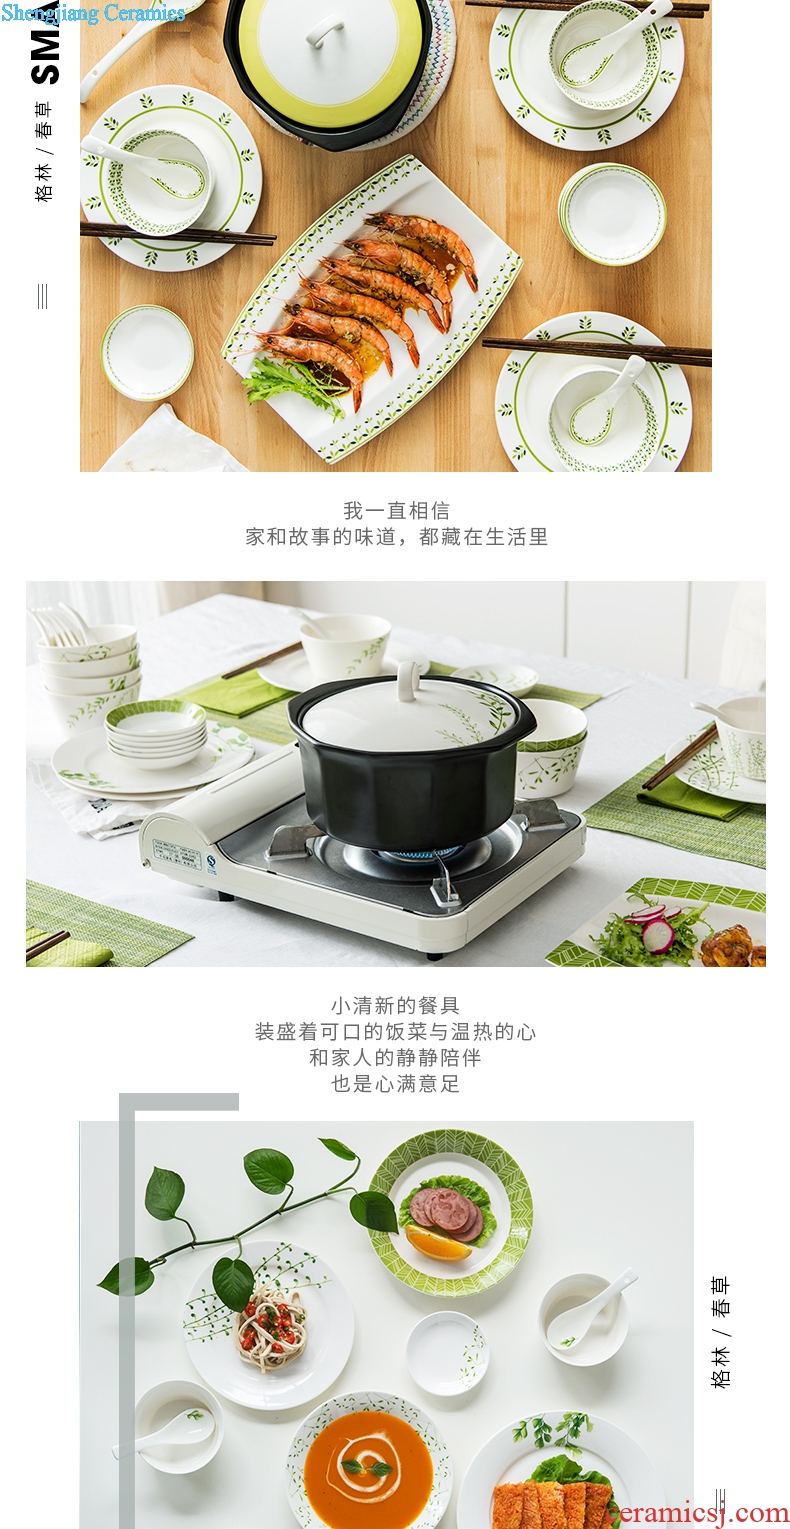 Million jia tableware suit dishes home dishes suit contracted 6 Chinese ins bowl chopsticks ceramic dish bowl suit